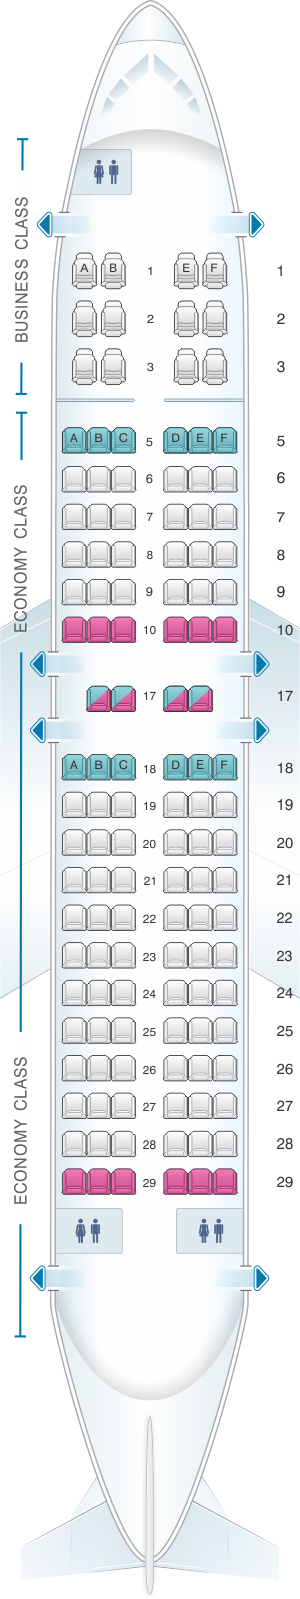 Seat map for Copa Airlines Boeing B737 700